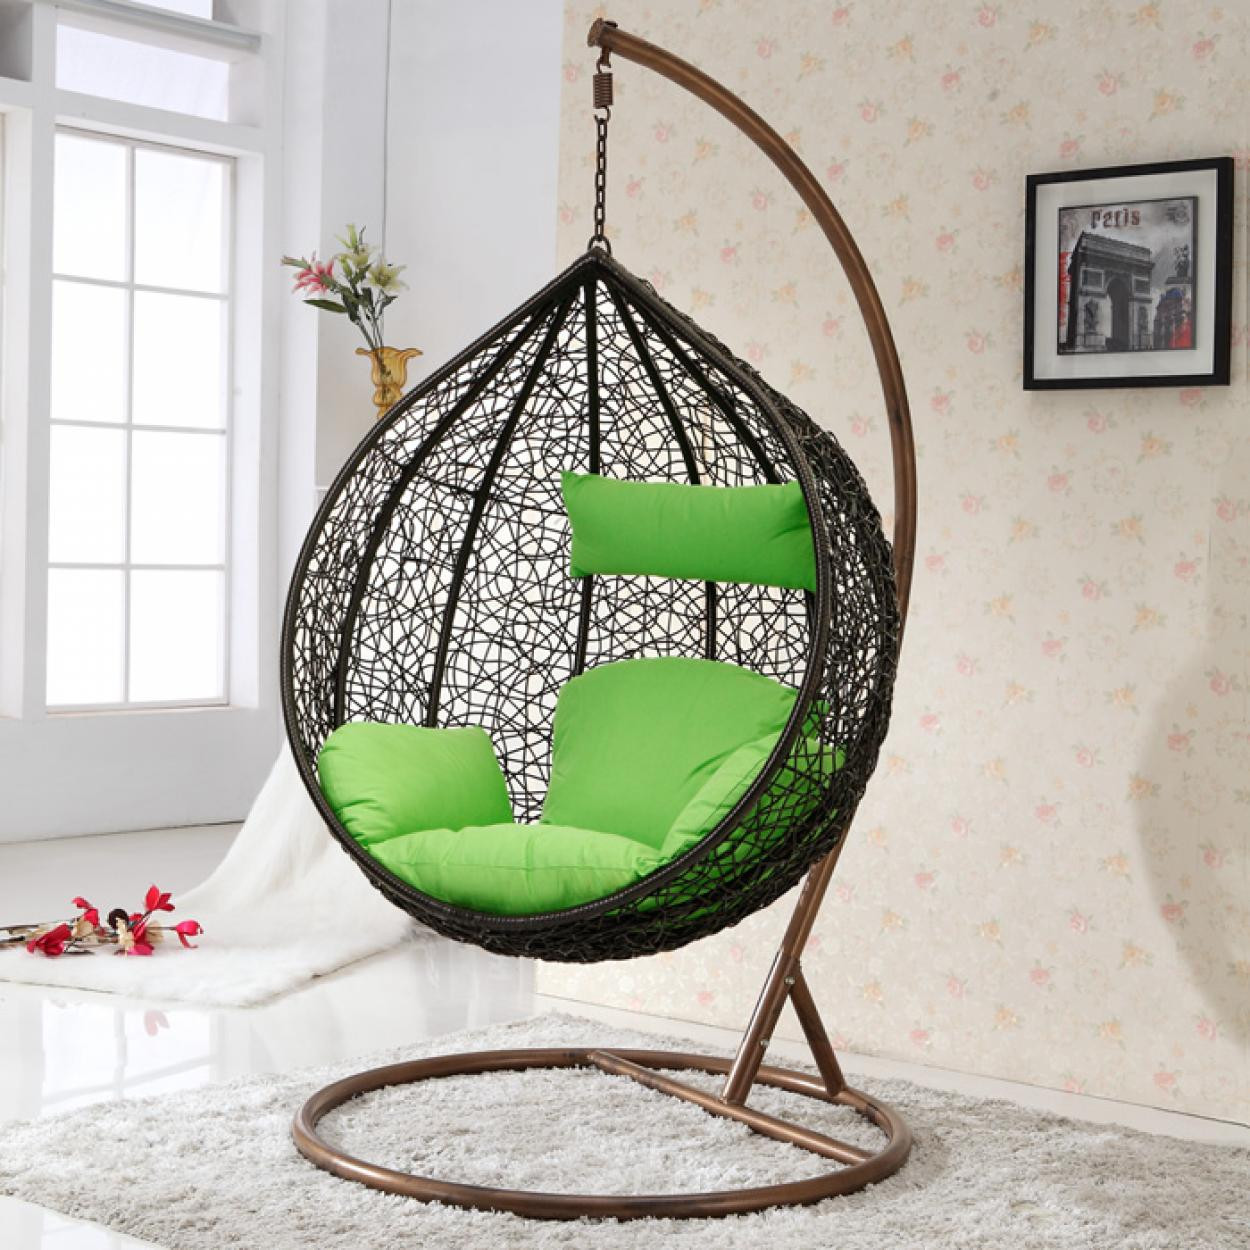 Best ideas about Indoor Hanging Chair
. Save or Pin Make The Days Feel fortable and Relaxed with Adorable Now.